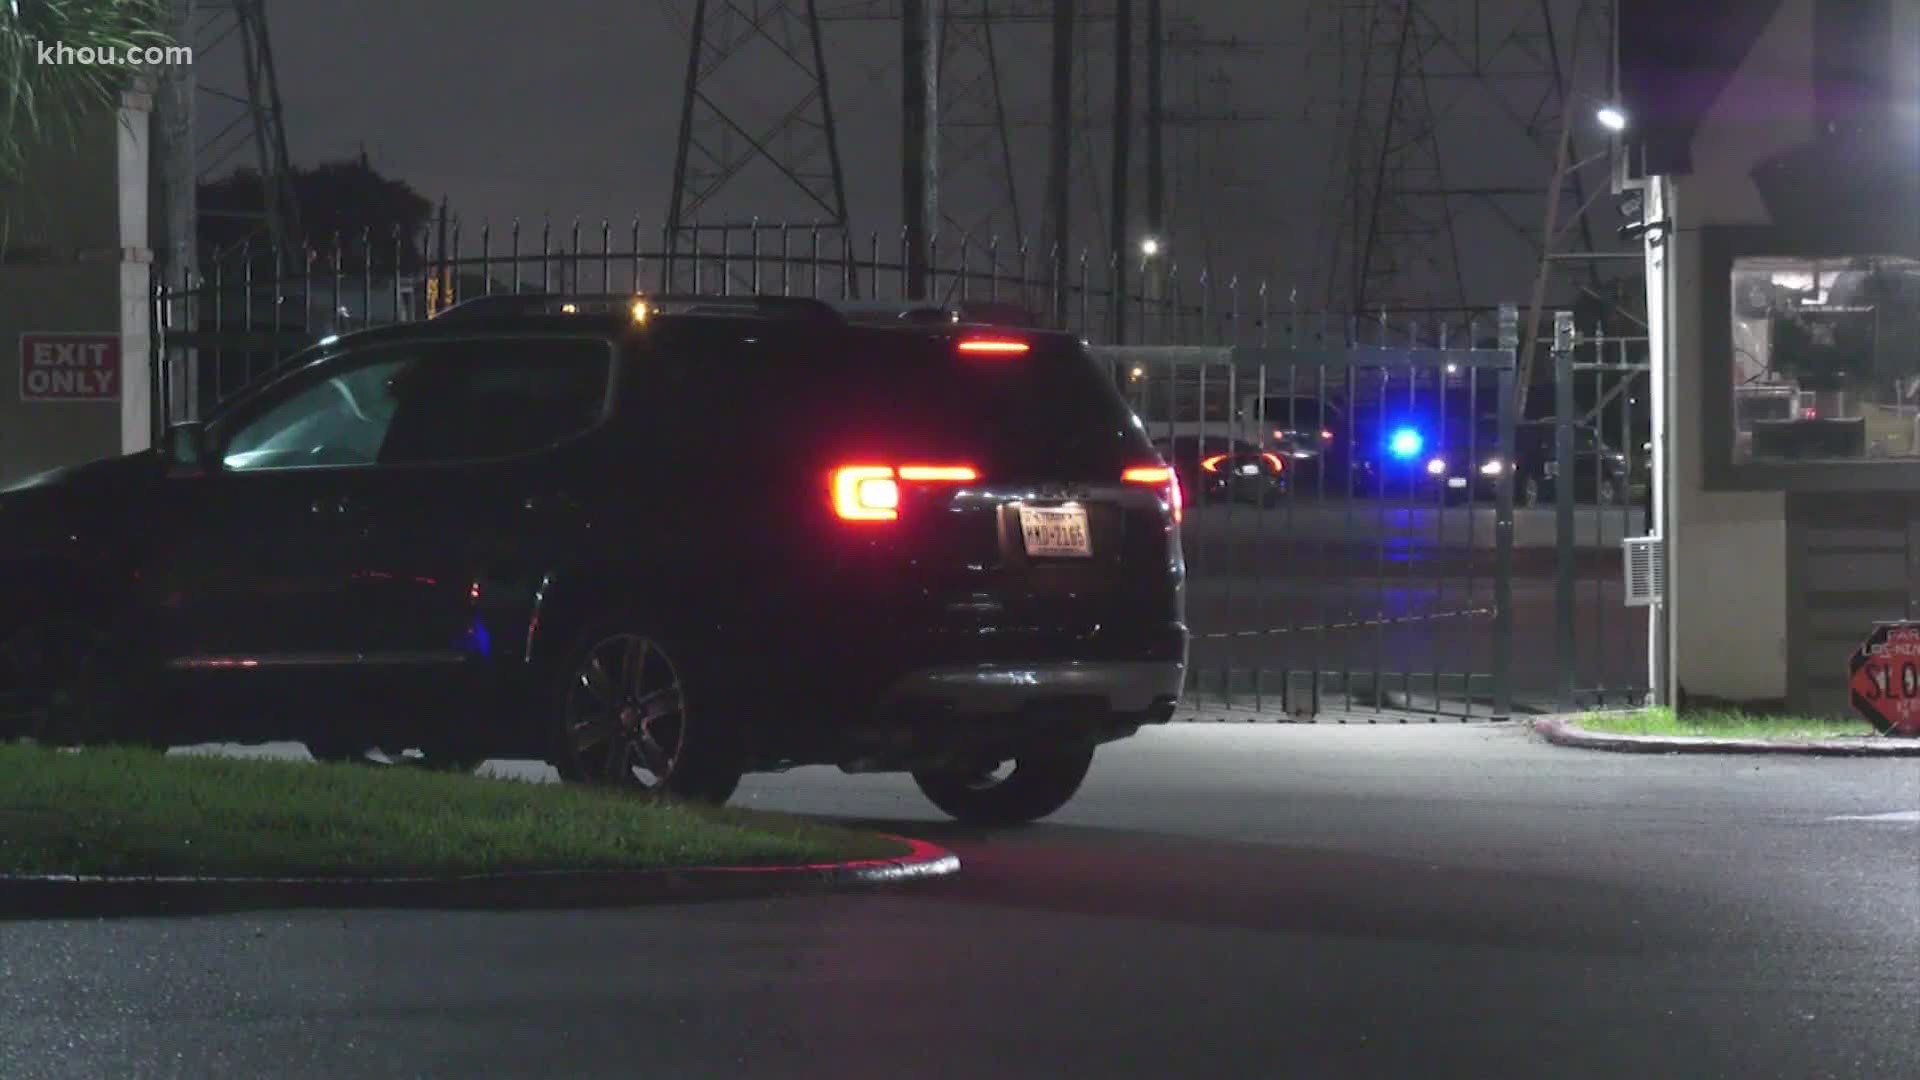 The shooting was reported after 8 p.m. Sunday on Chimney Rock near Gulfton at the Sharon Park Village apartments.